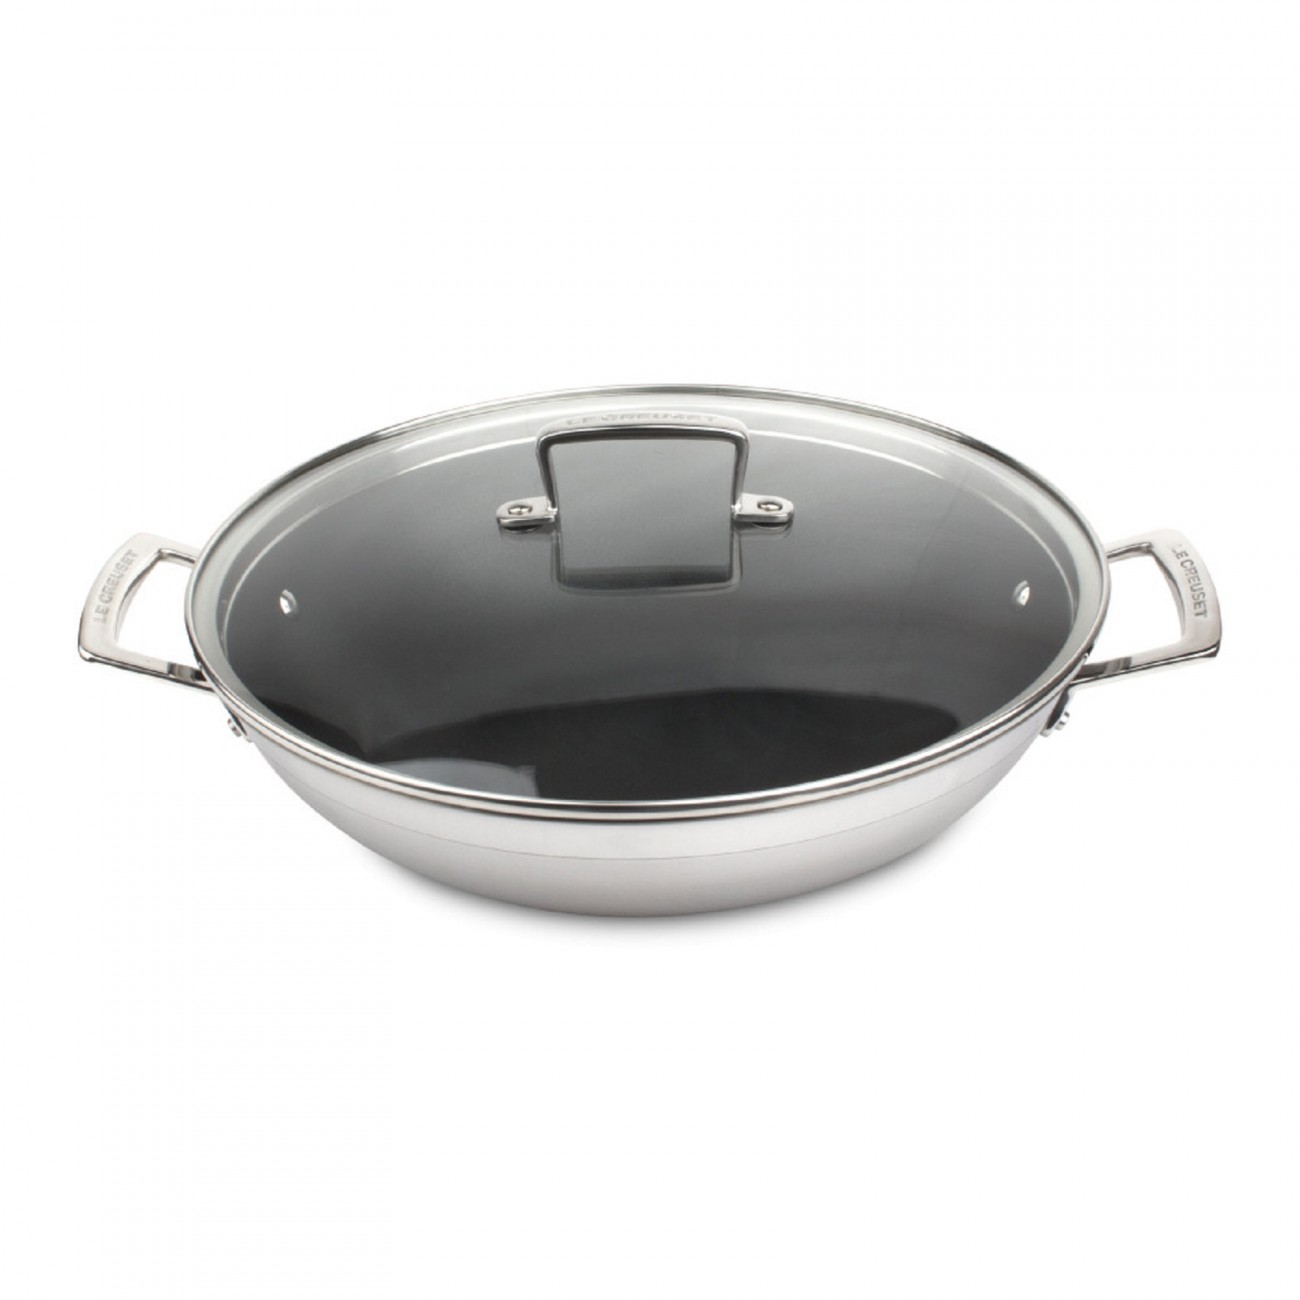 https://www.tattahome.com/132281-large_default/le-creuset-stainless-steel-non-stick-wok-with-glass-lid-30.jpg